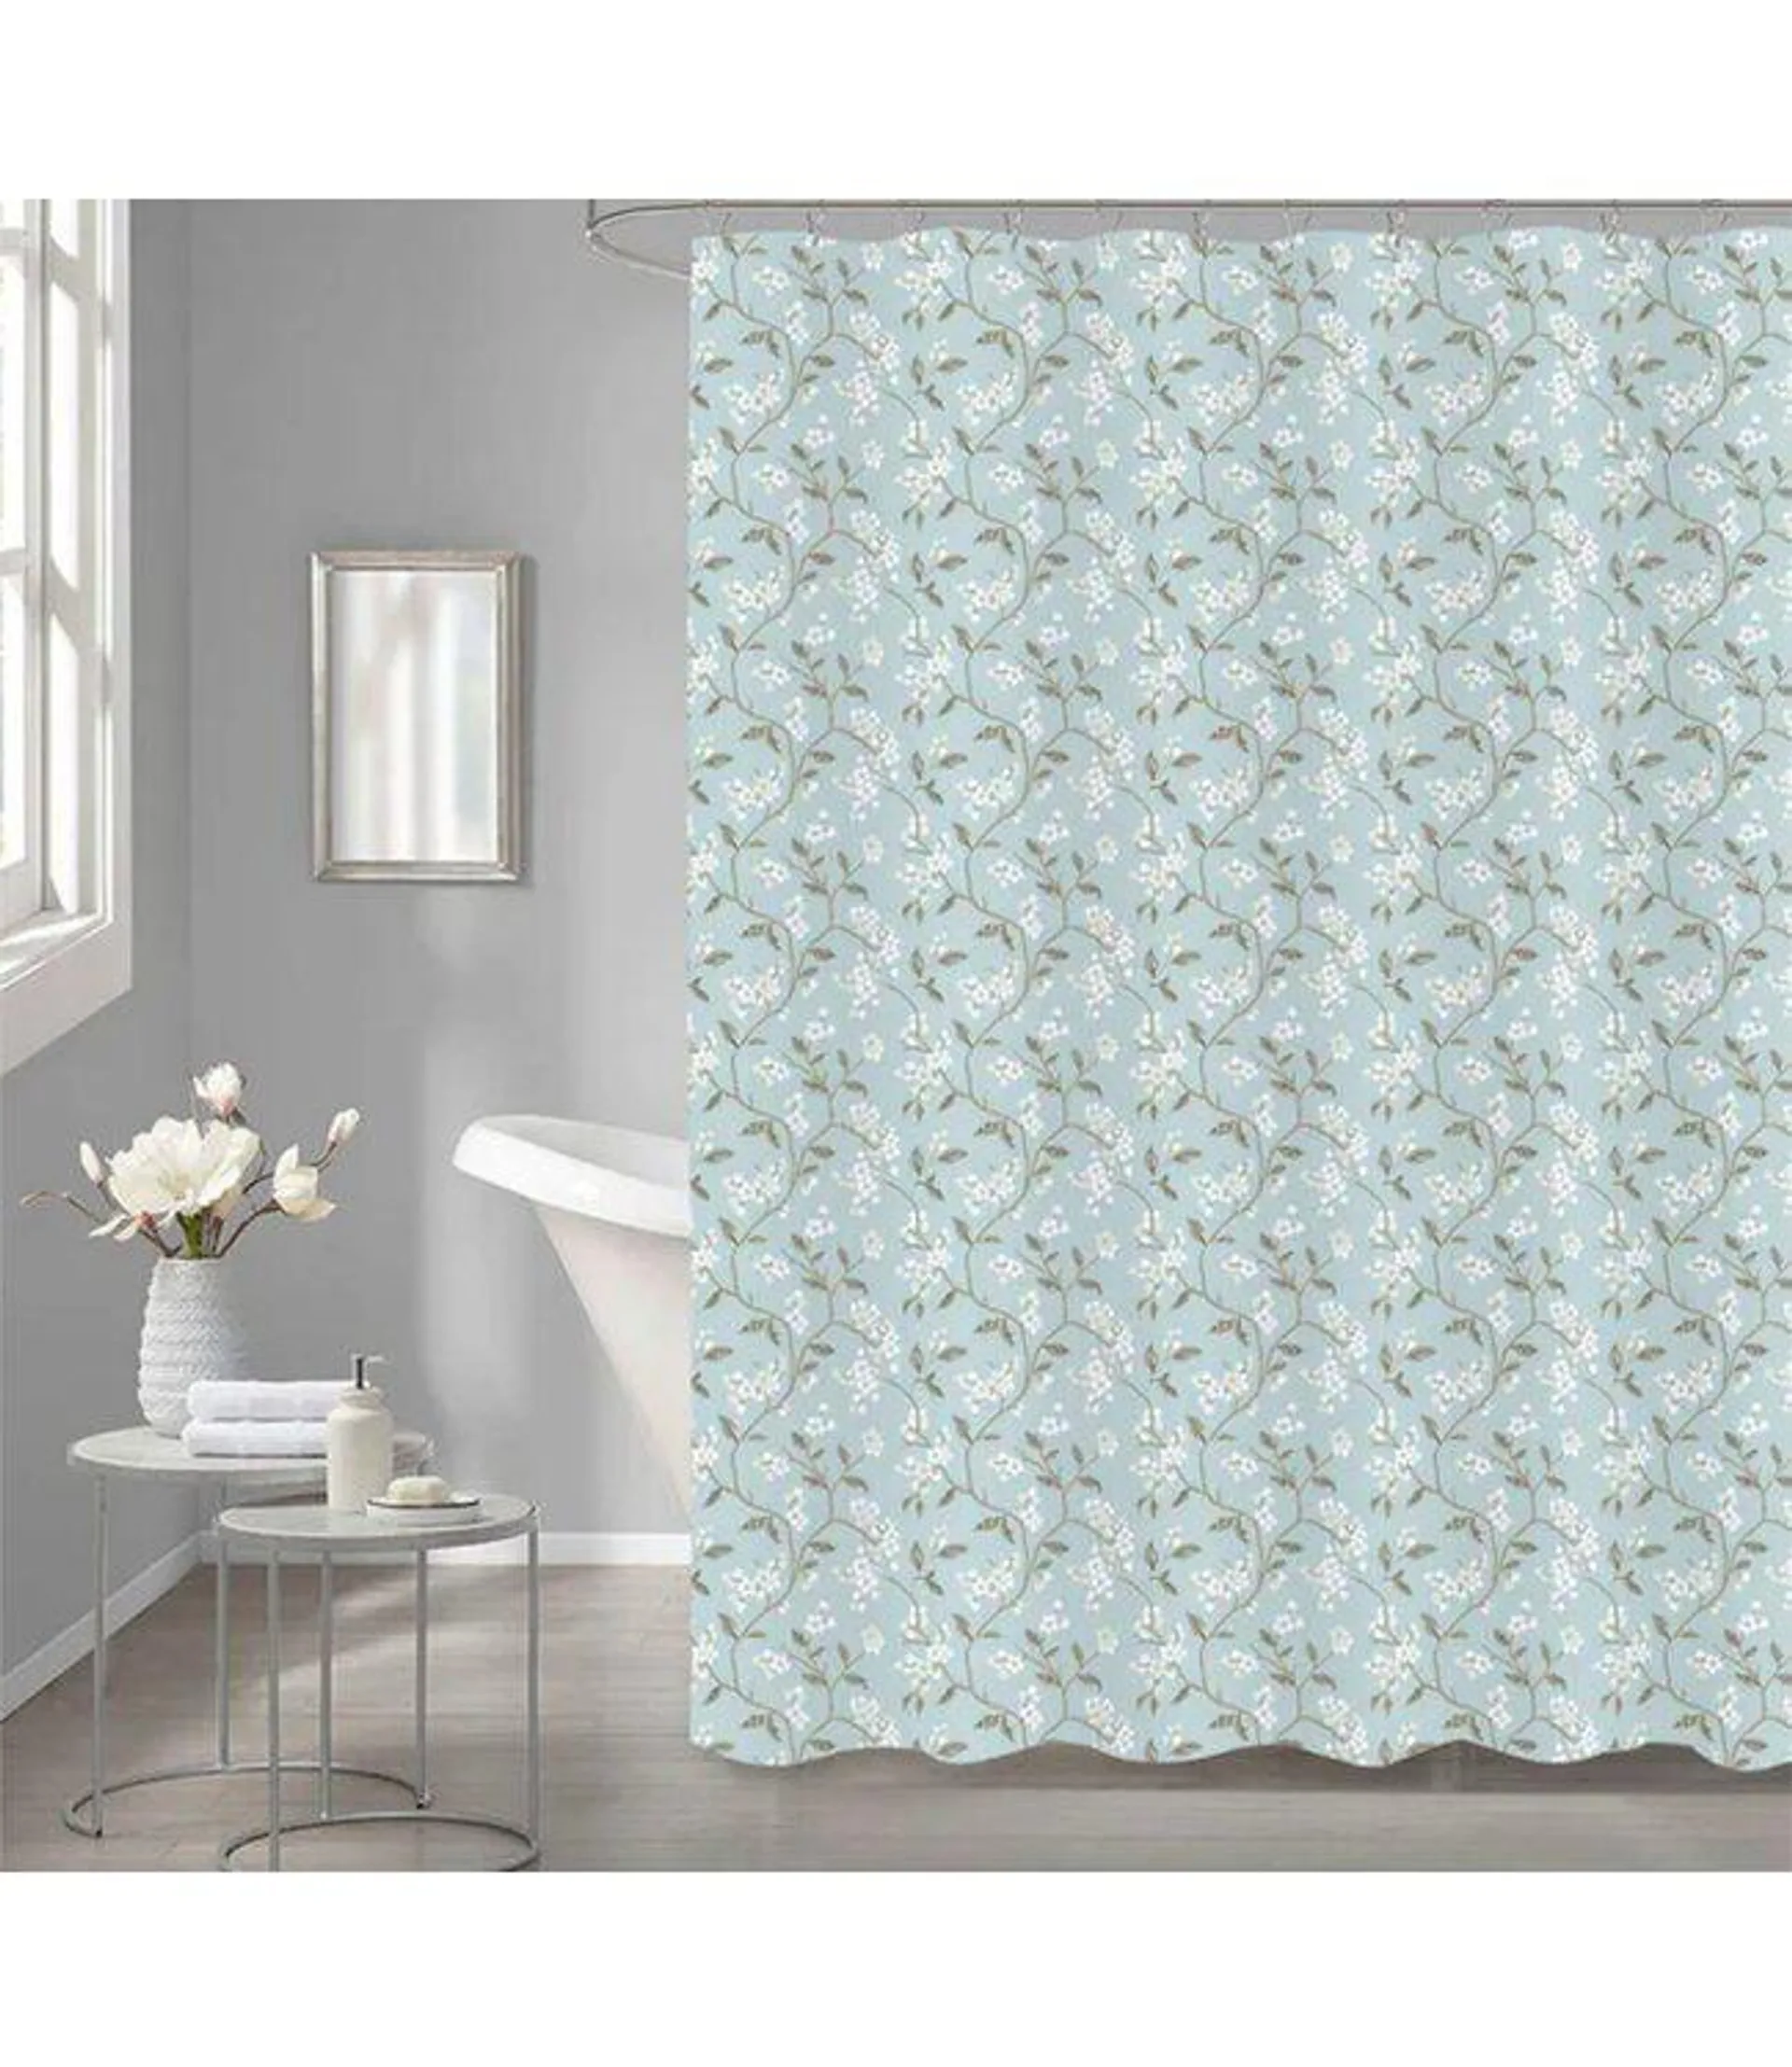 LILY SHOWER CURTAIN